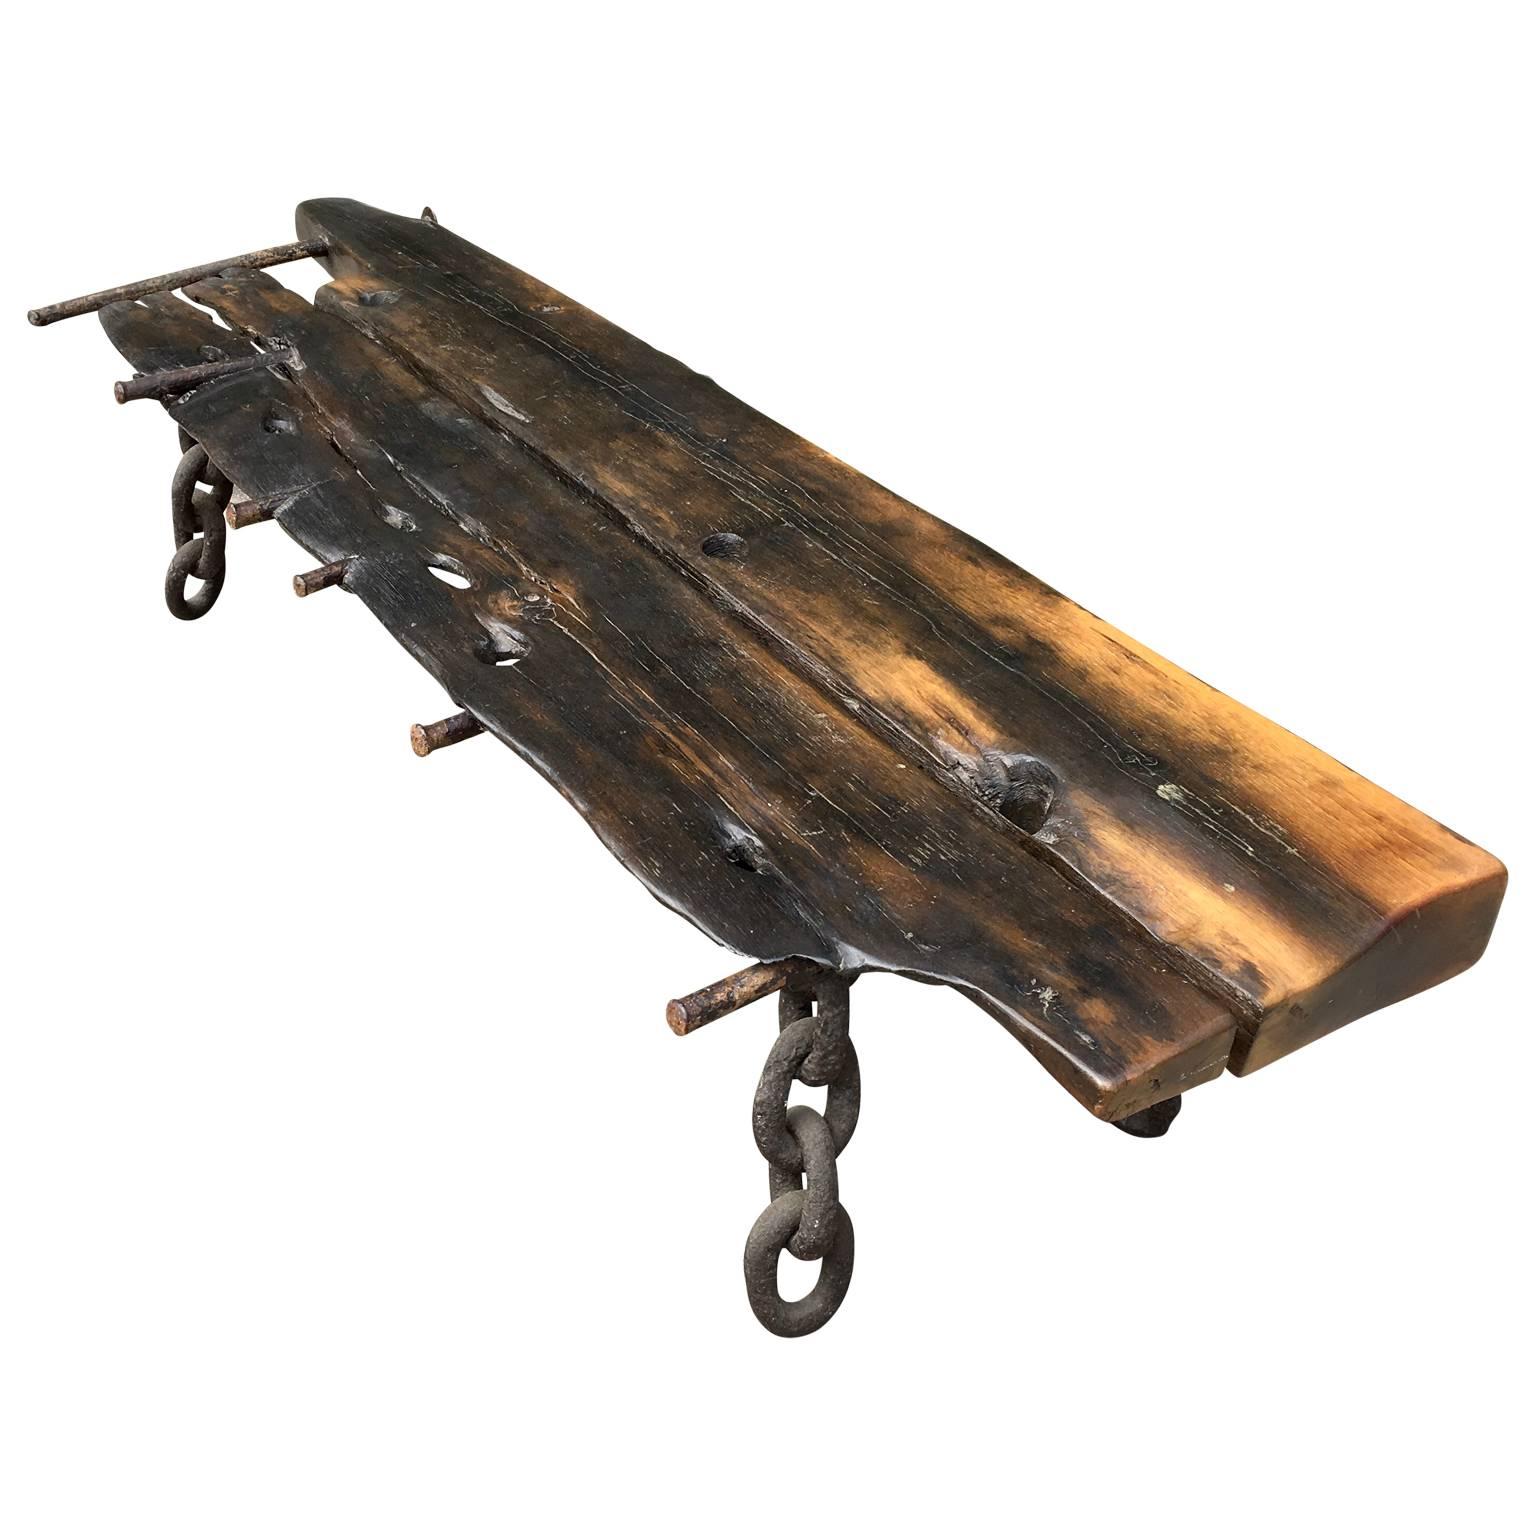 American Craftsman M. Stalker Long Studio Bench from Shipwreck Wood and Chain For Sale